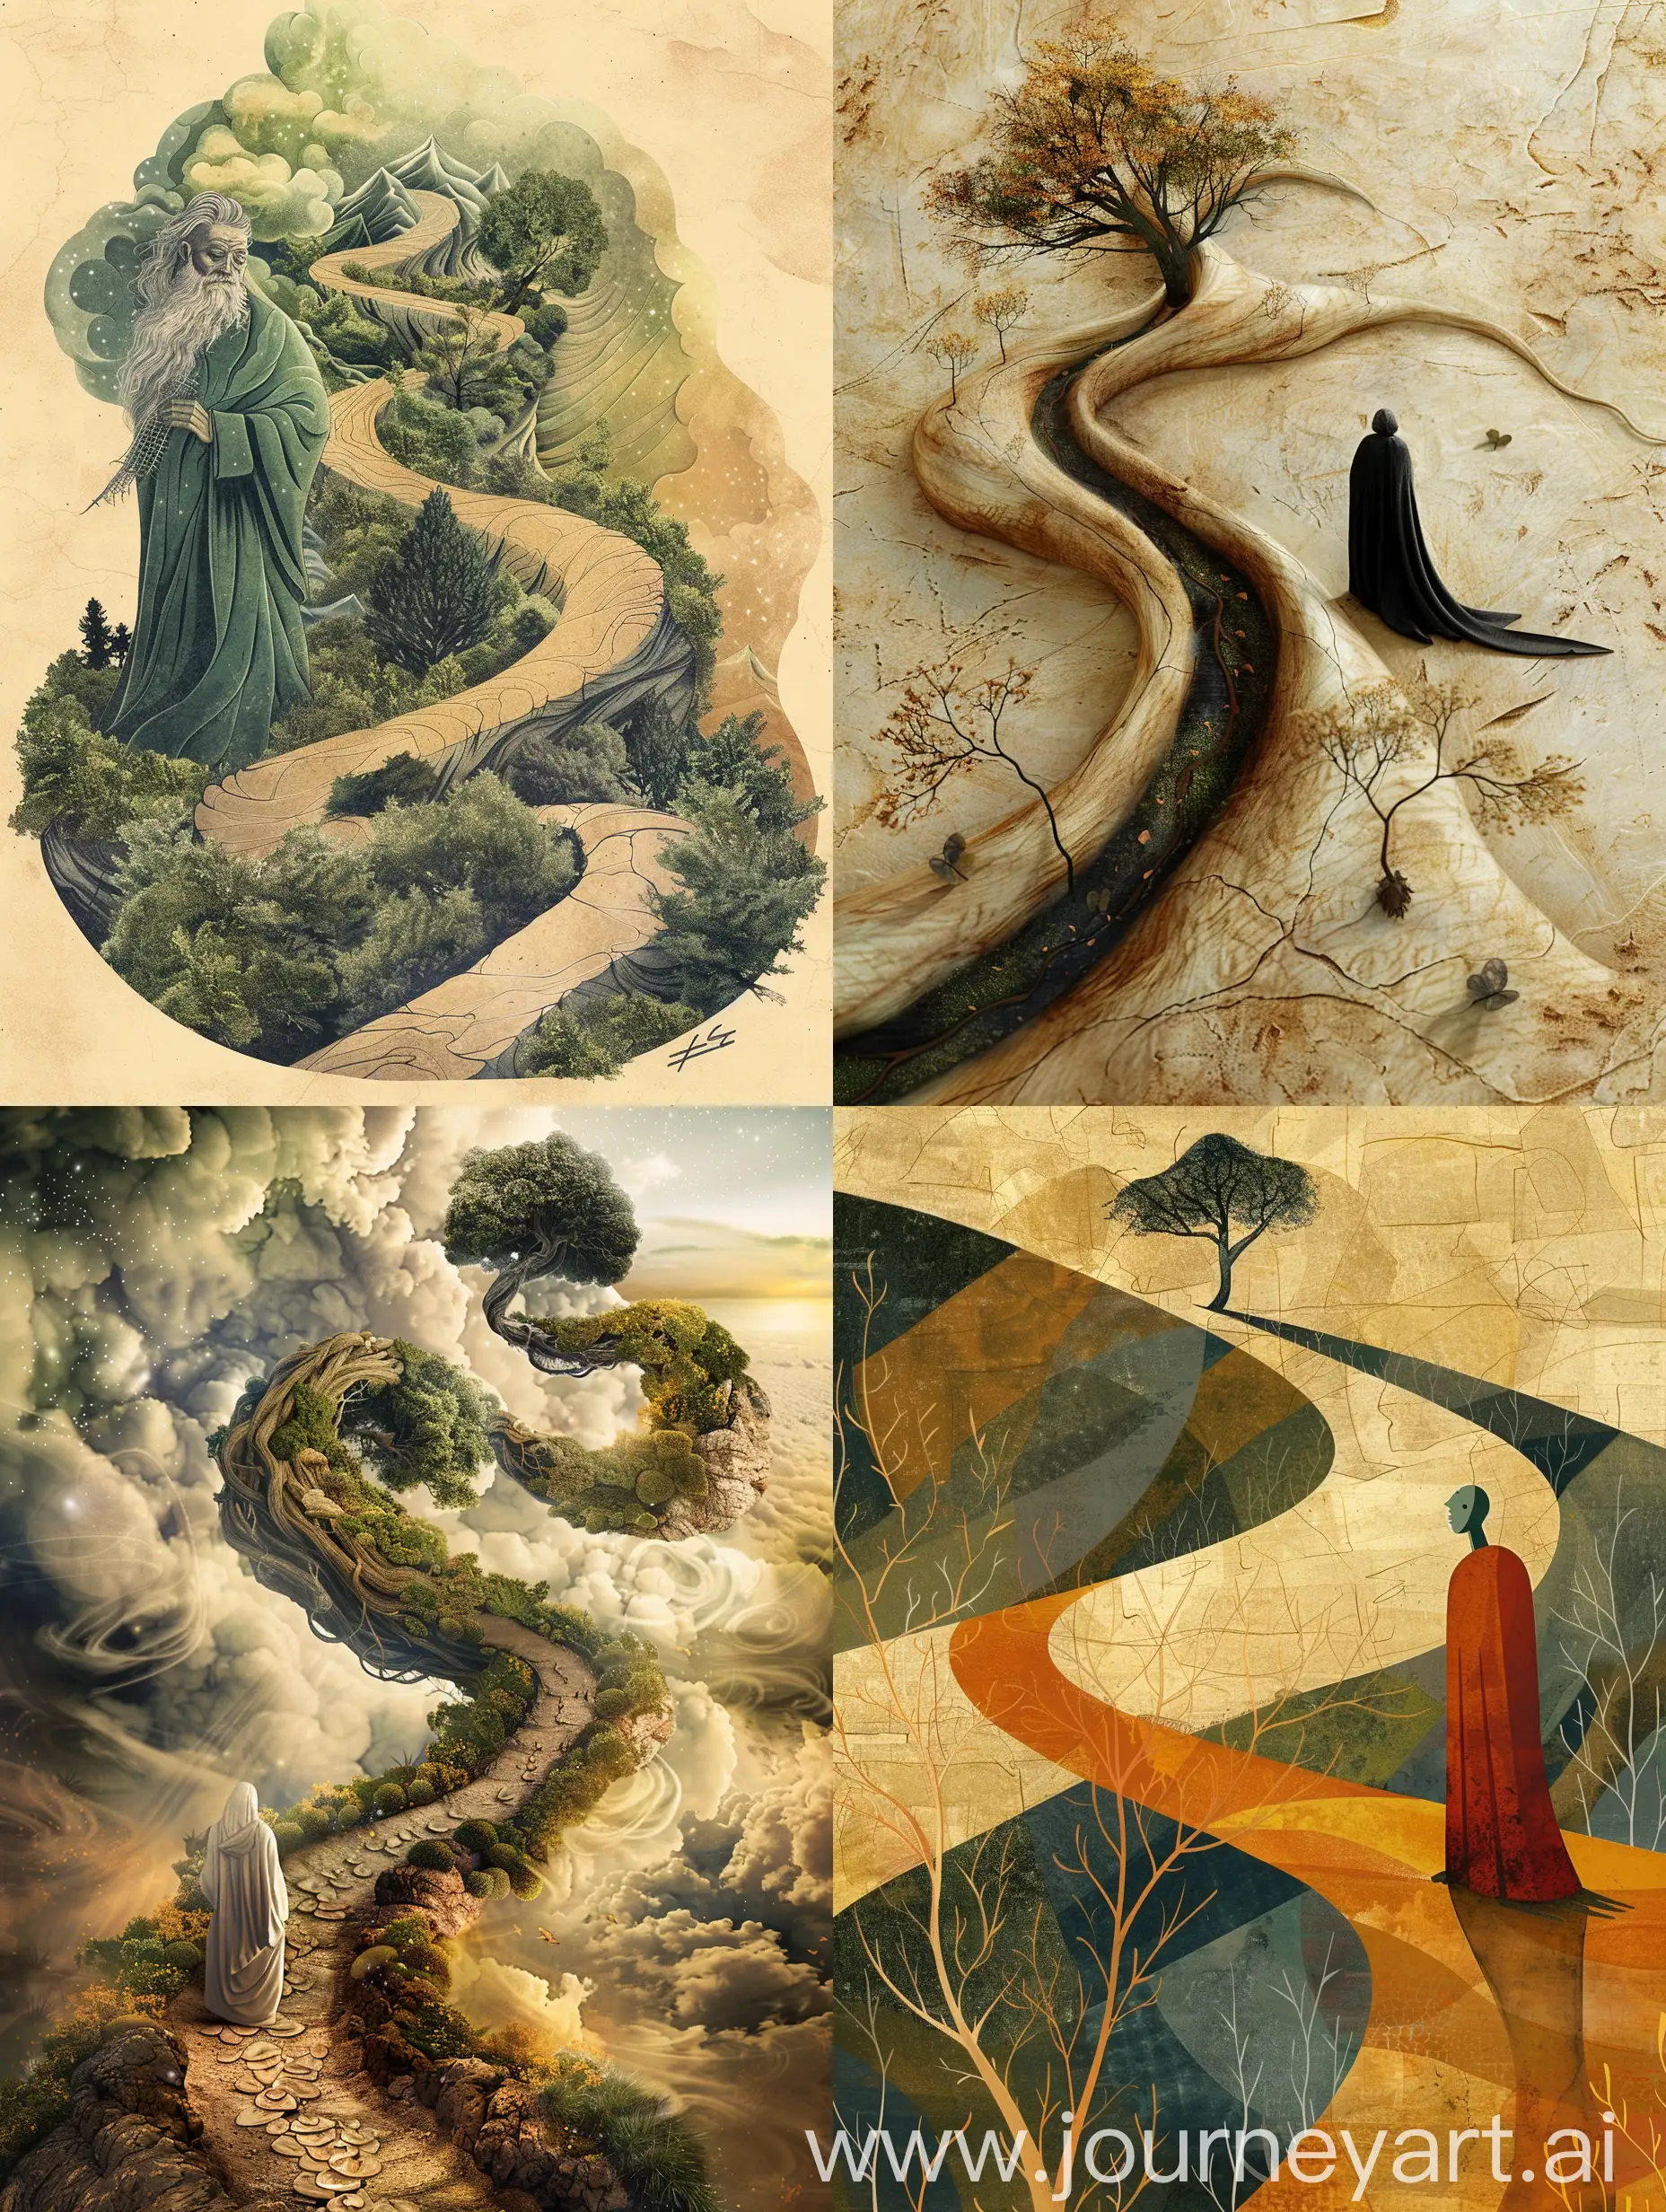 Create an image that symbolizes the themes of wisdom, patience, imperfection, and the unpredictability of life as depicted in Ecclesiastes 7:1-14. The image should convey the idea of seeking wisdom, embracing humility, and finding purpose in life's challenges. Use visual elements such as a winding path, a wise figure, symbols of patience and growth, and elements representing the ups and downs of life. The overall tone should be reflective and thought-provoking.